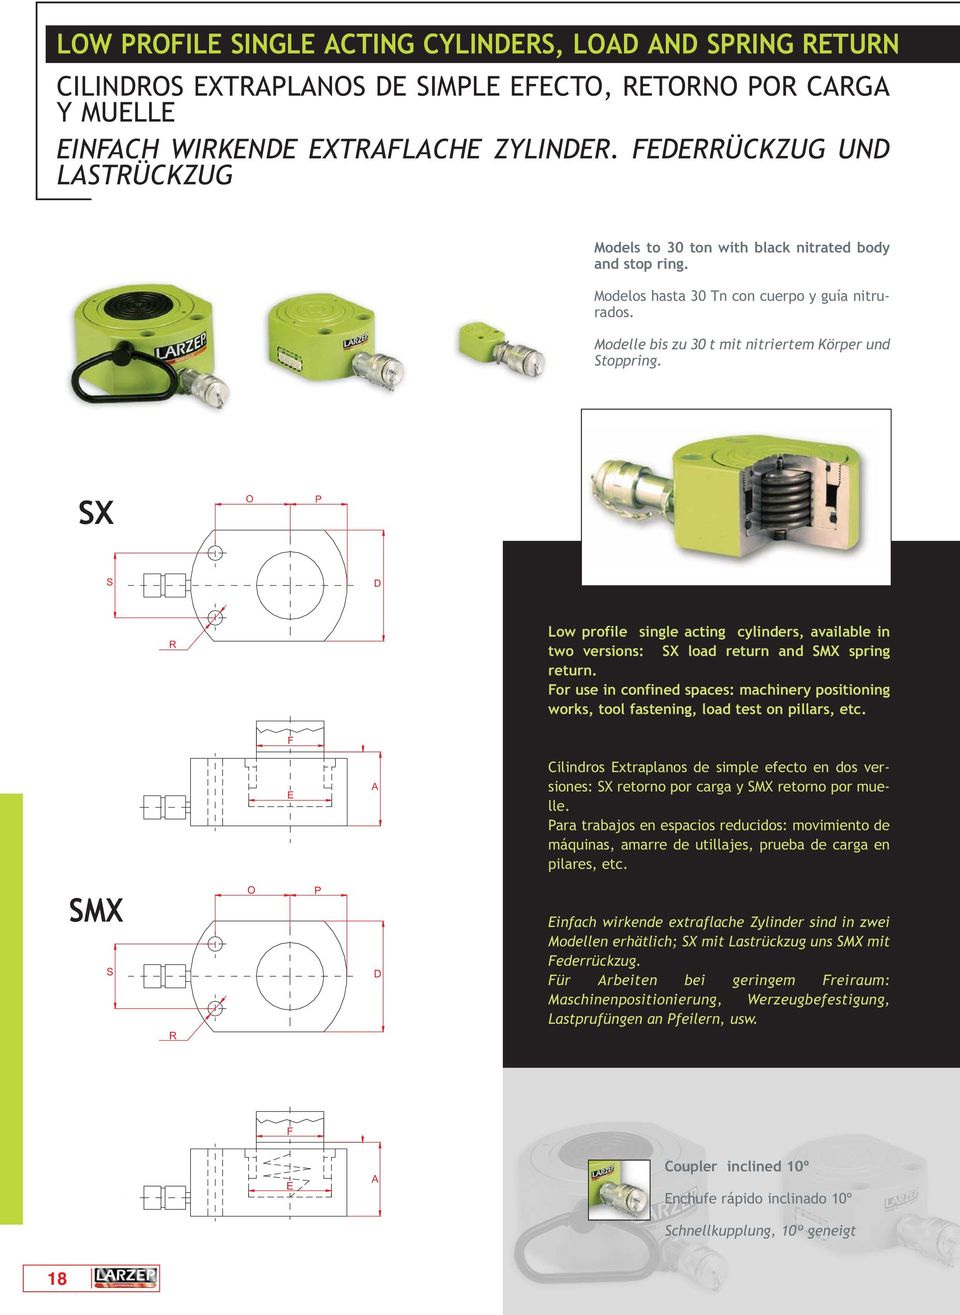 SX Low profile single acting cylinders, available in two versions: SX load return and SMX spring return.